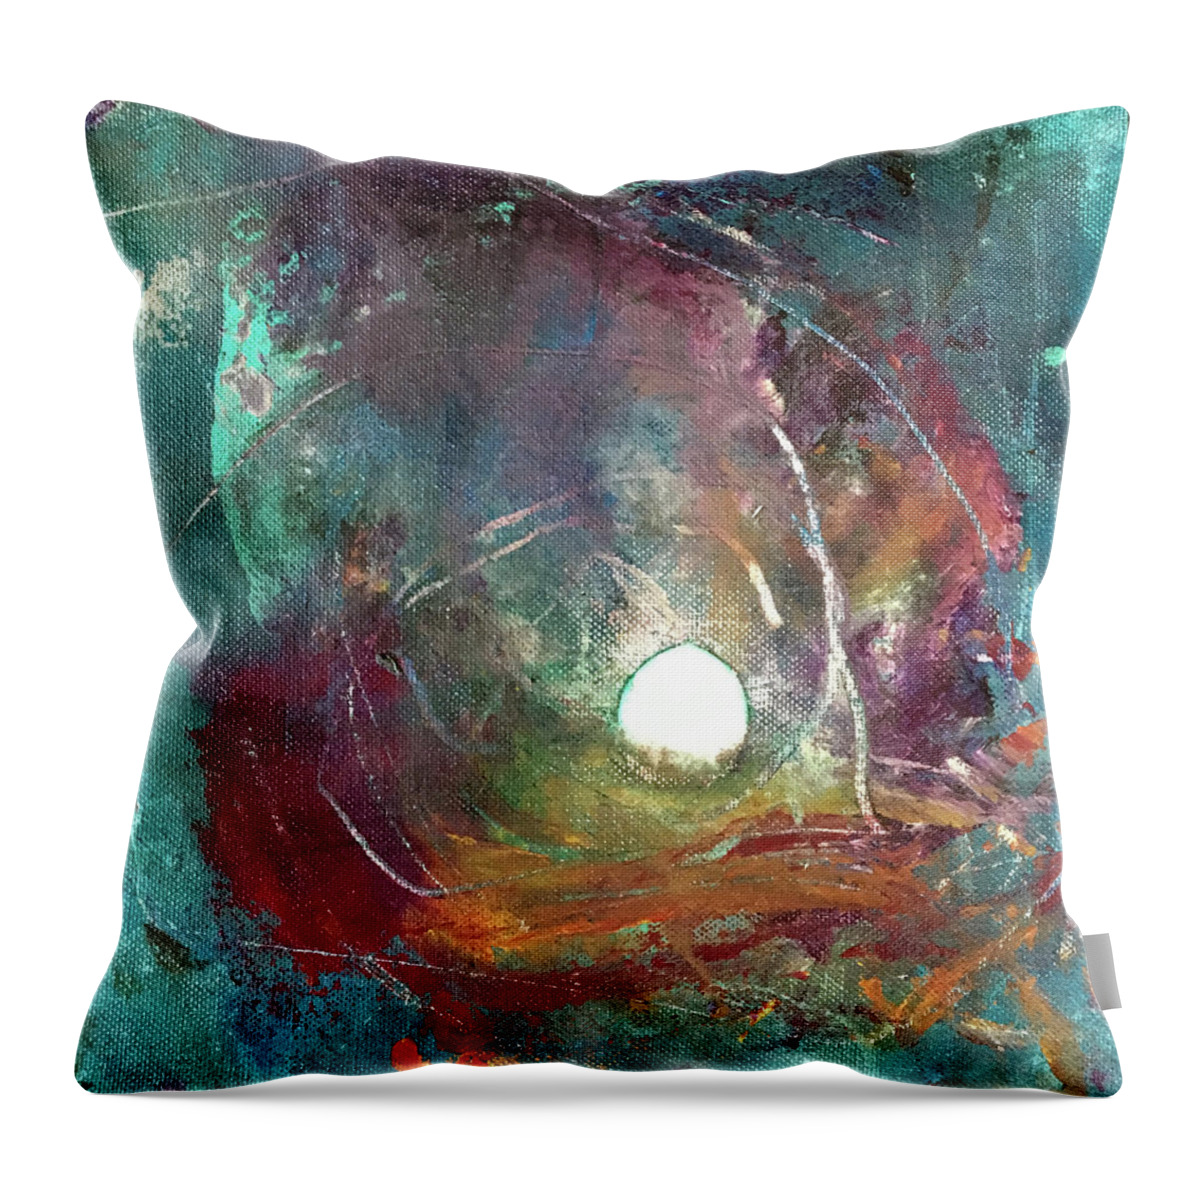 Abstract Art Throw Pillow featuring the painting Psalm Equinox by Rodney Frederickson